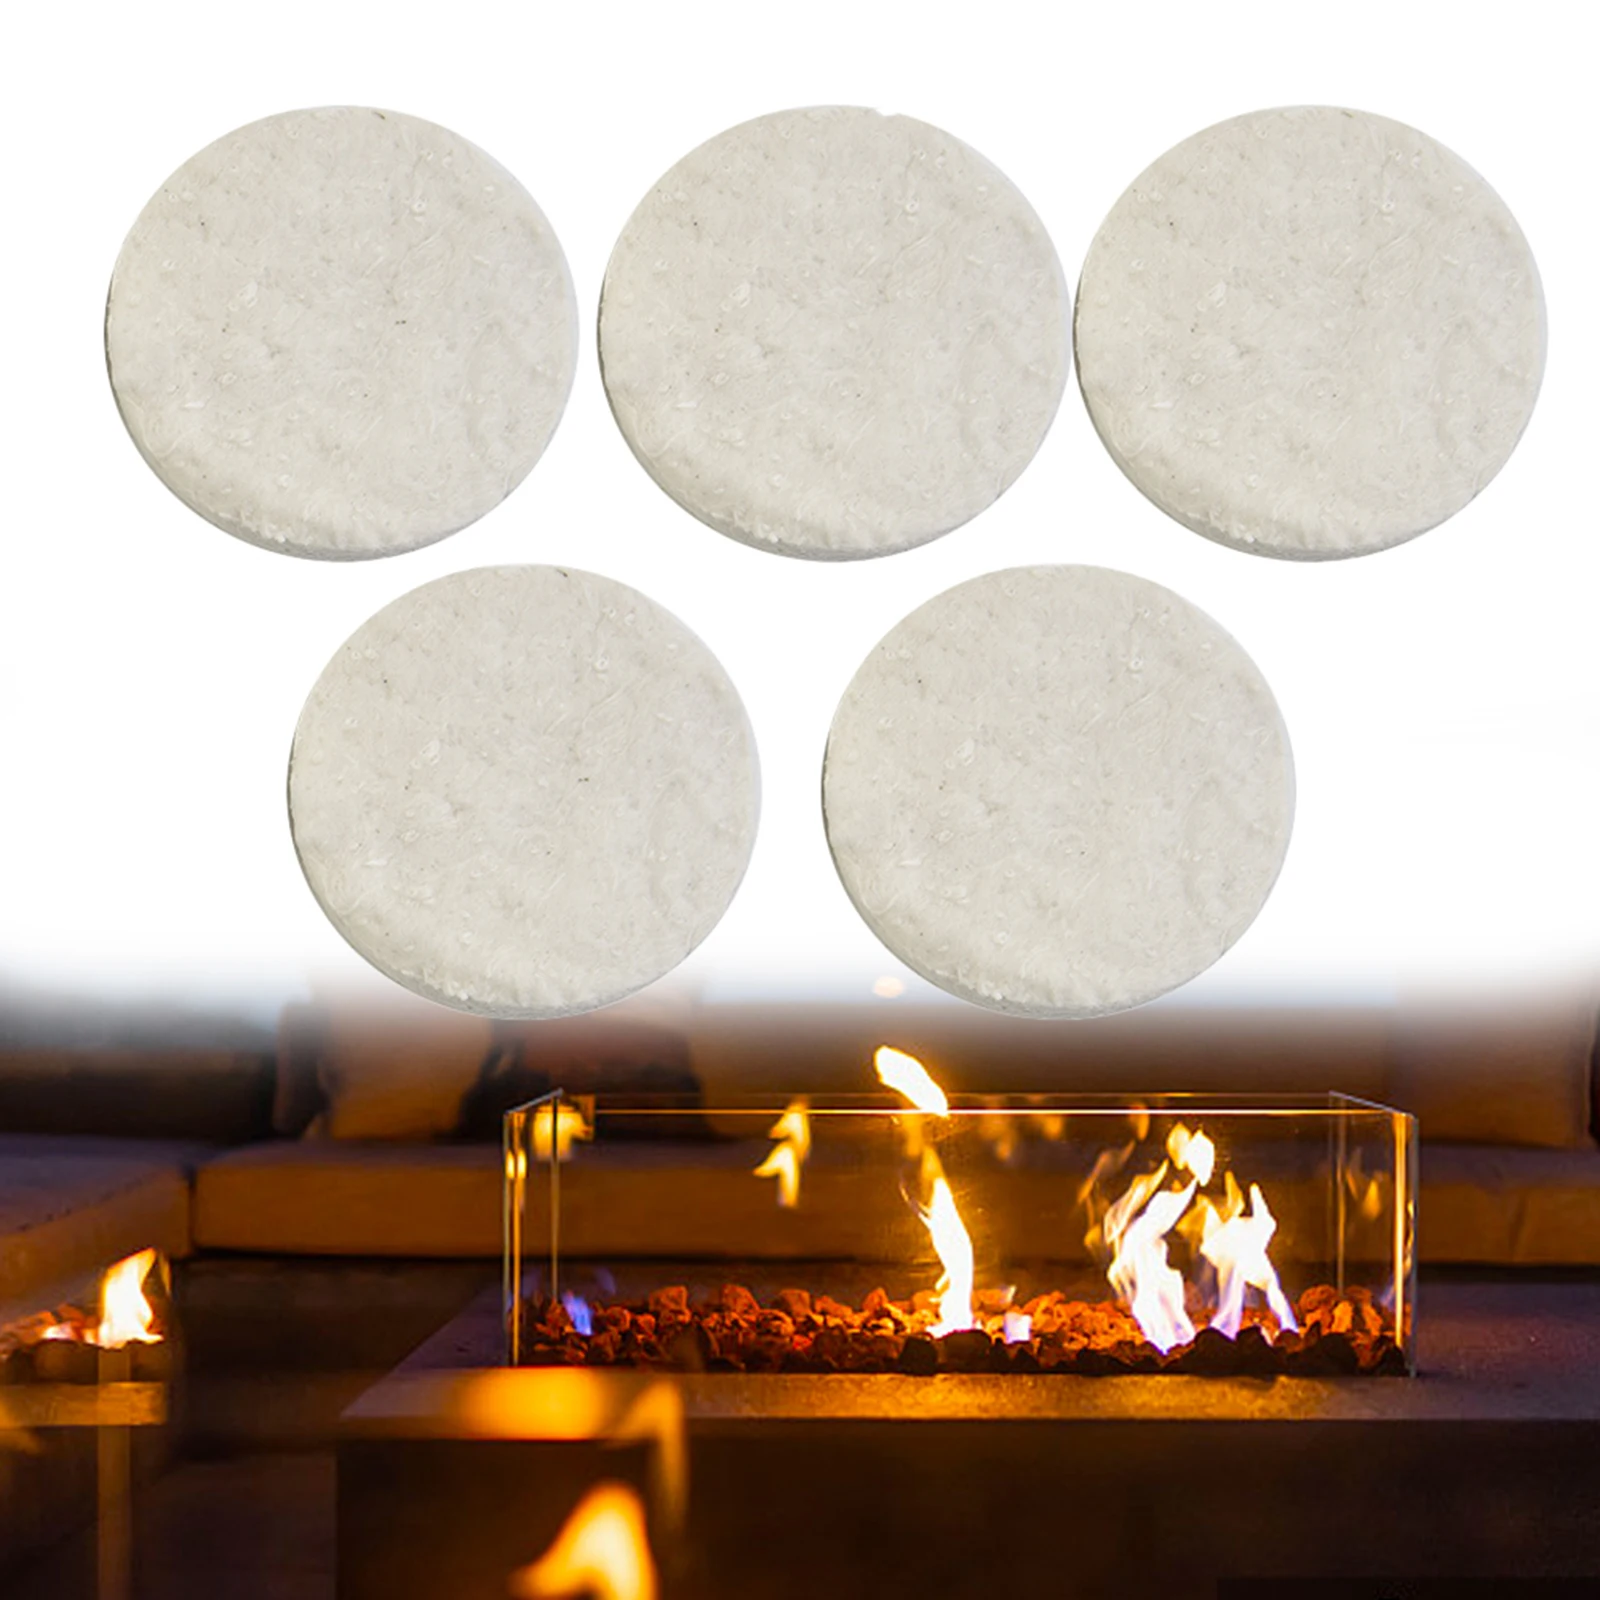 

1/2/3/5pcs Fireplace Ceramic Sponge Round Calcium-Magnesium-Silicate Fibres Firplace Firebox Safety Bio Fire Household Hardware